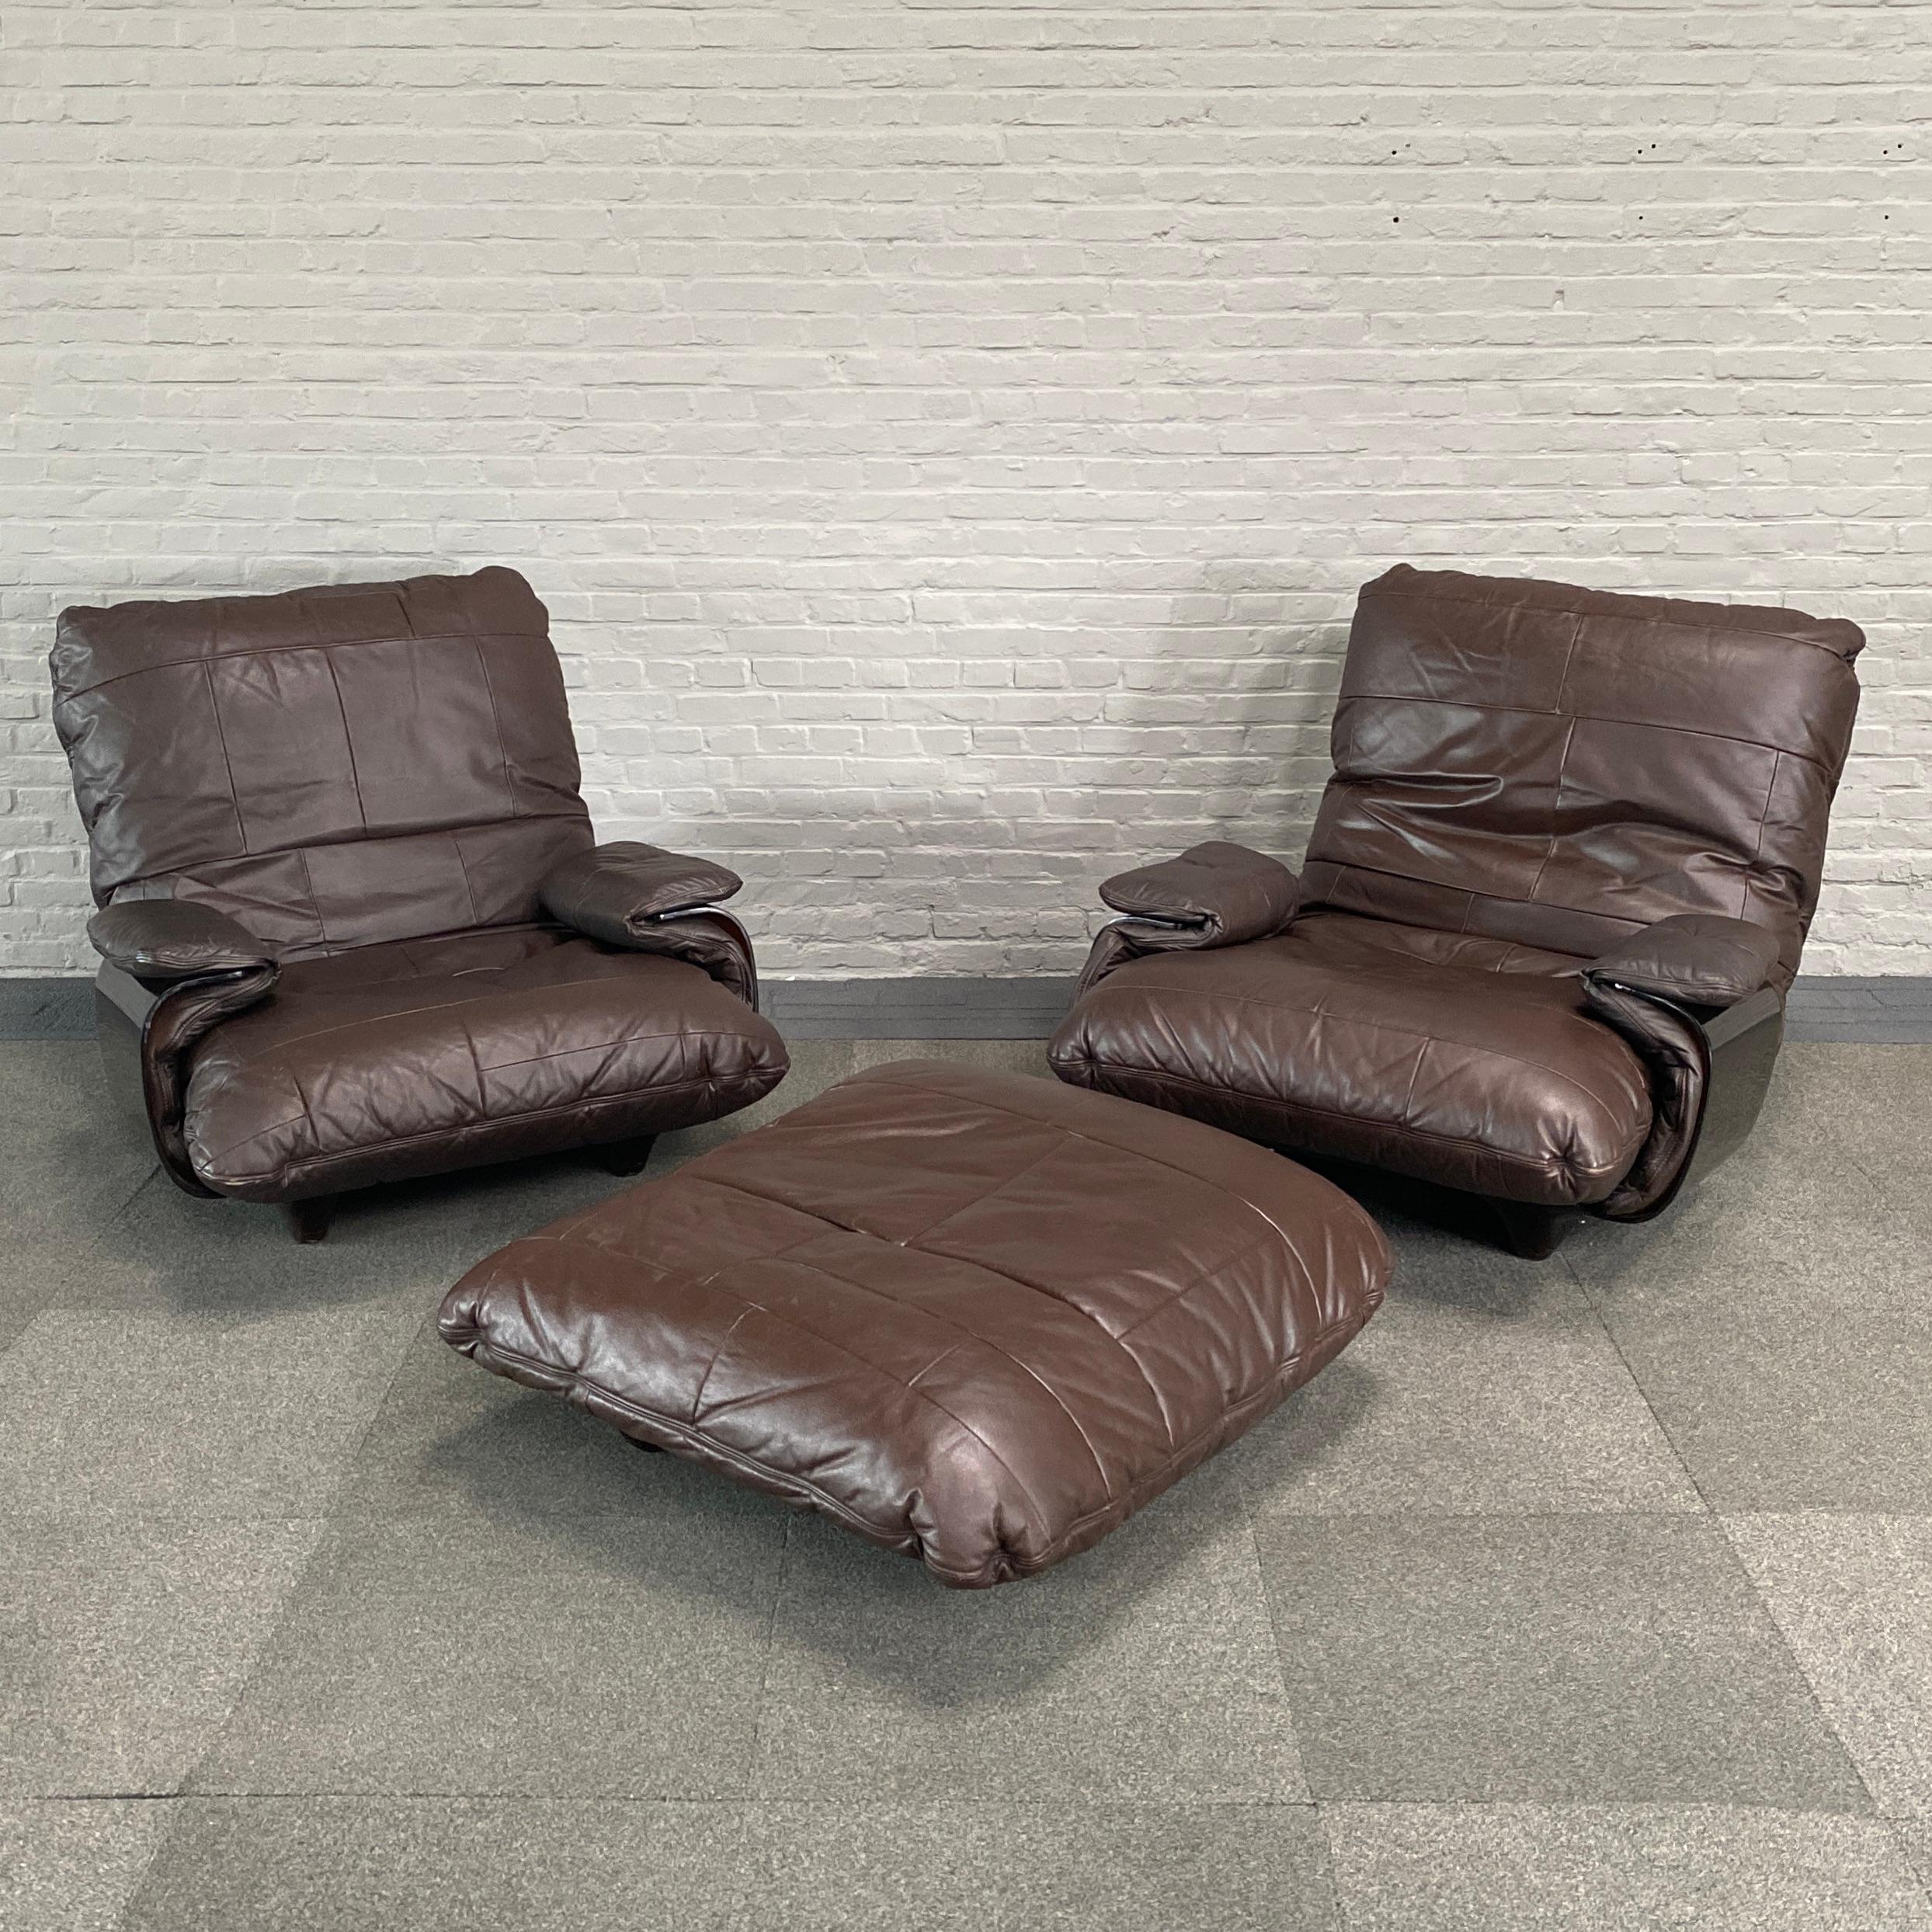 Marsala Sofa Lounge Set with Ottoman by Michel Ducaroy for Ligne Roset, 1970's For Sale 8